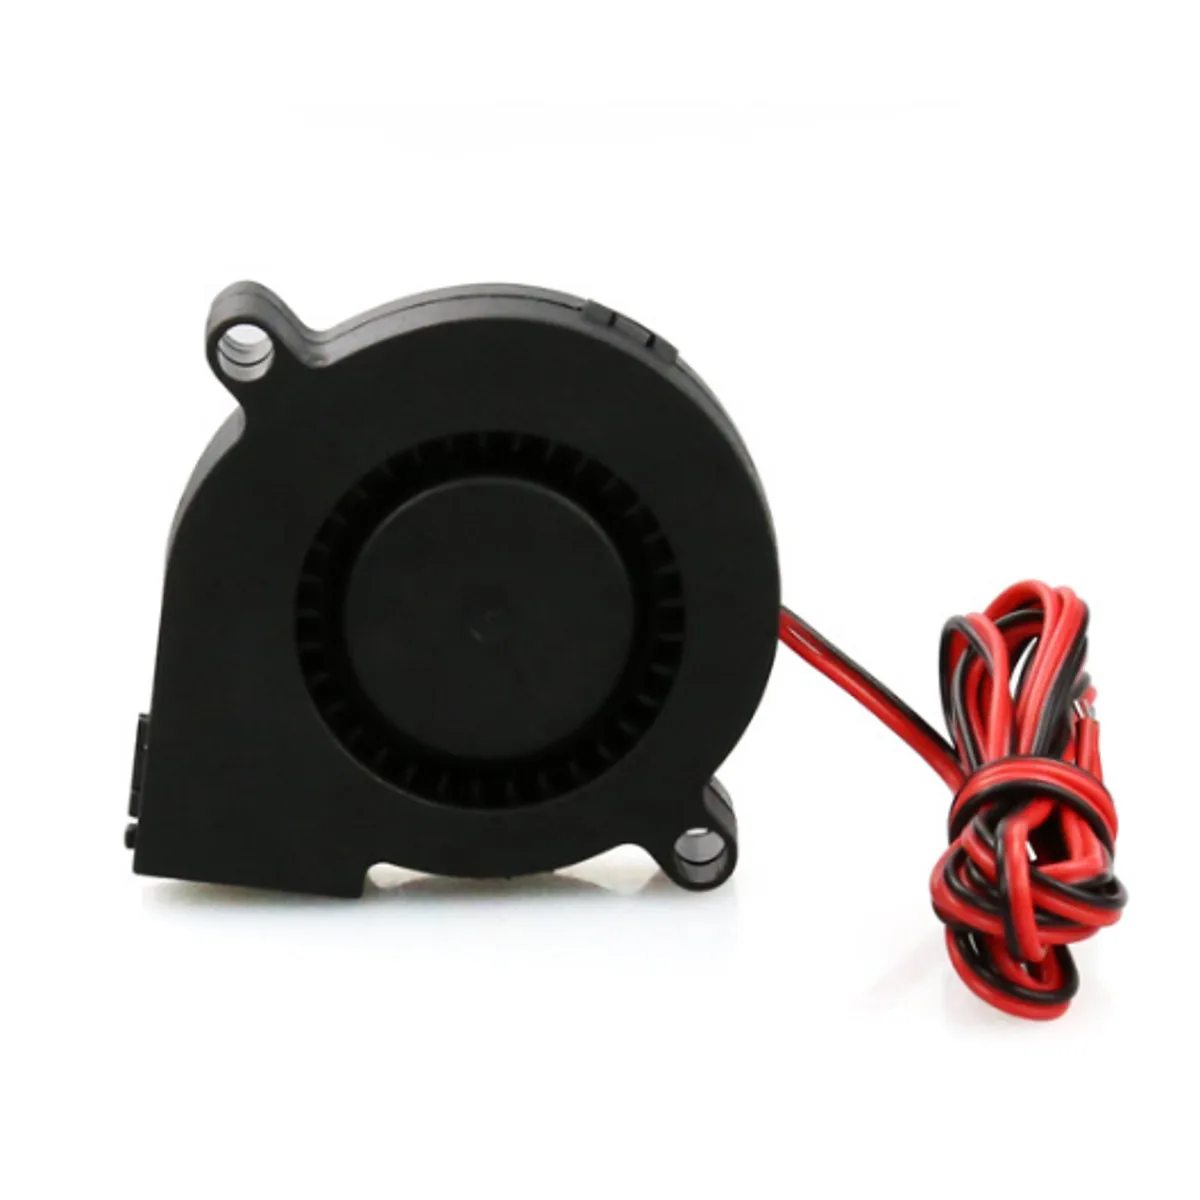 DC 12V 2 Pin 0.13A 50mm Brushless Blower Cooling Fan for 3D Printer1PC 12V 2Pin Brushless Blower DC Cooling Fan 5015 50x50x15mm